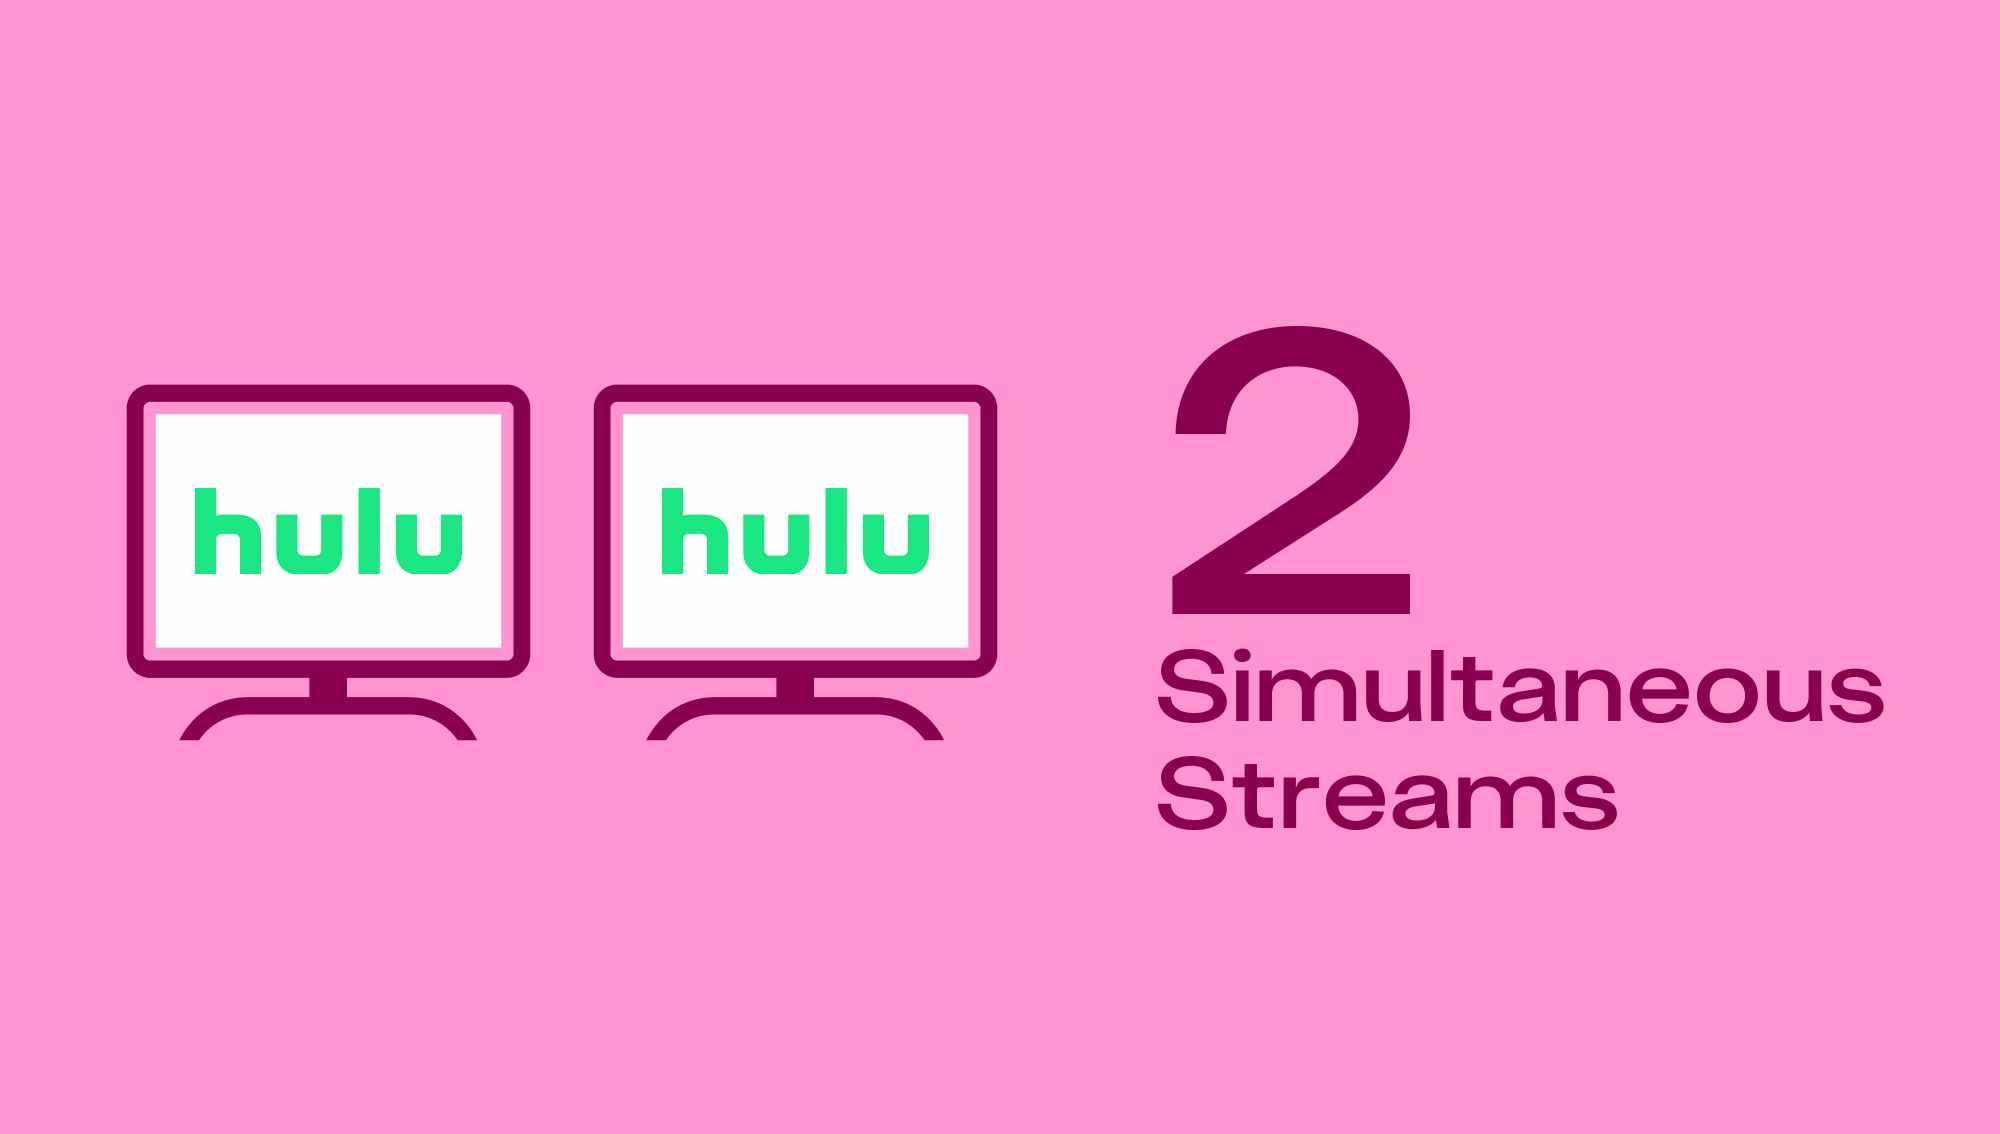 2 people can stream Hulu at the same time